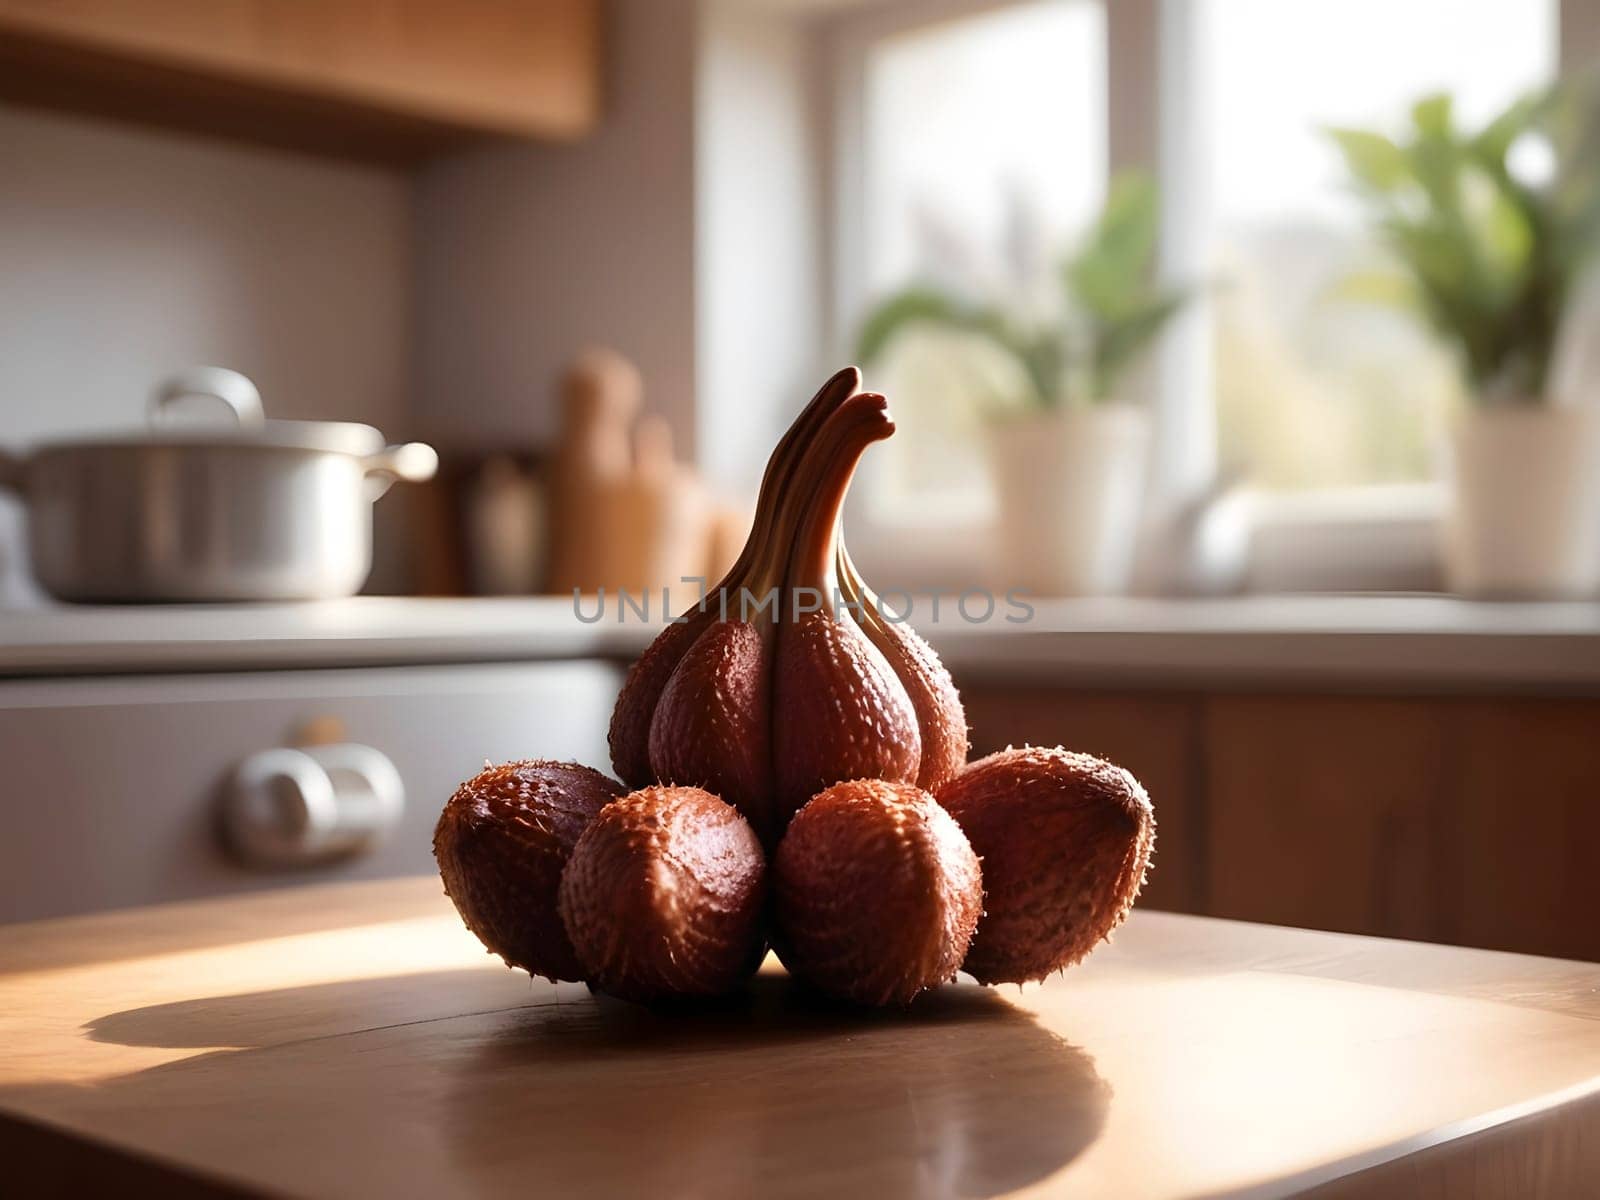 Welcoming Ambiance: A Defocused Kitchen bathed in Afternoon Light, Showcasing Salak by mailos